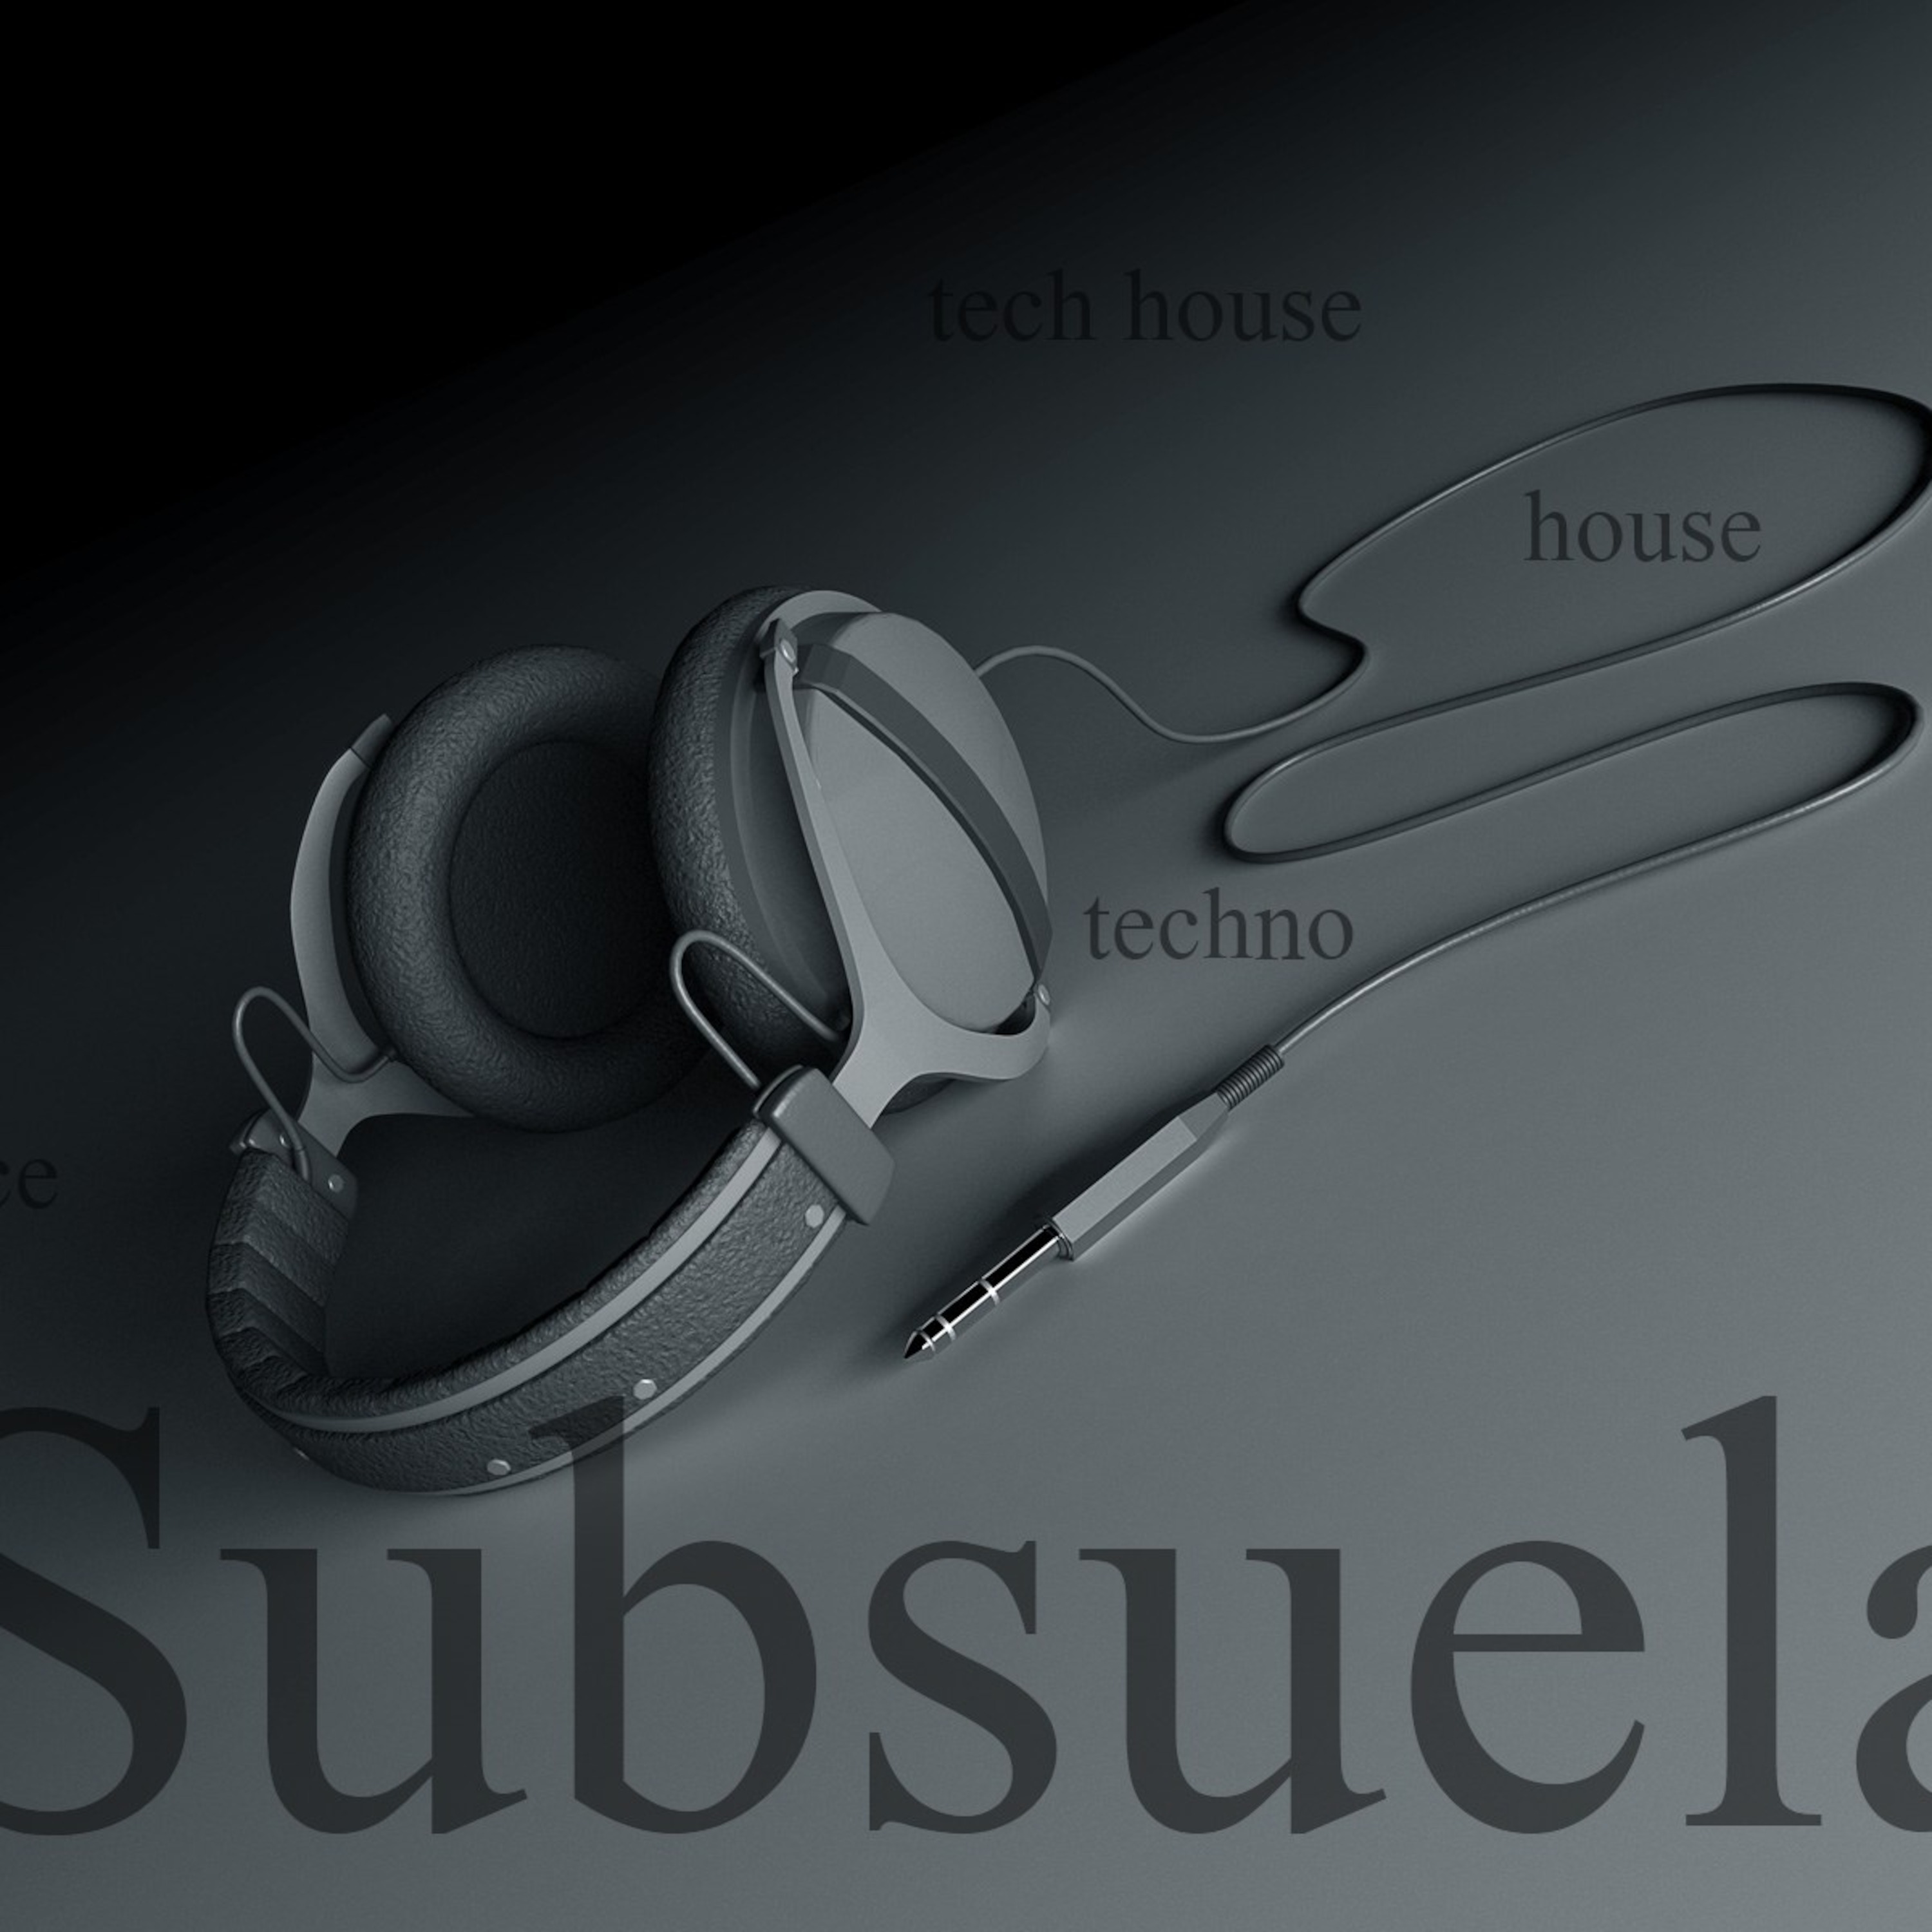 Subsuela Podcast